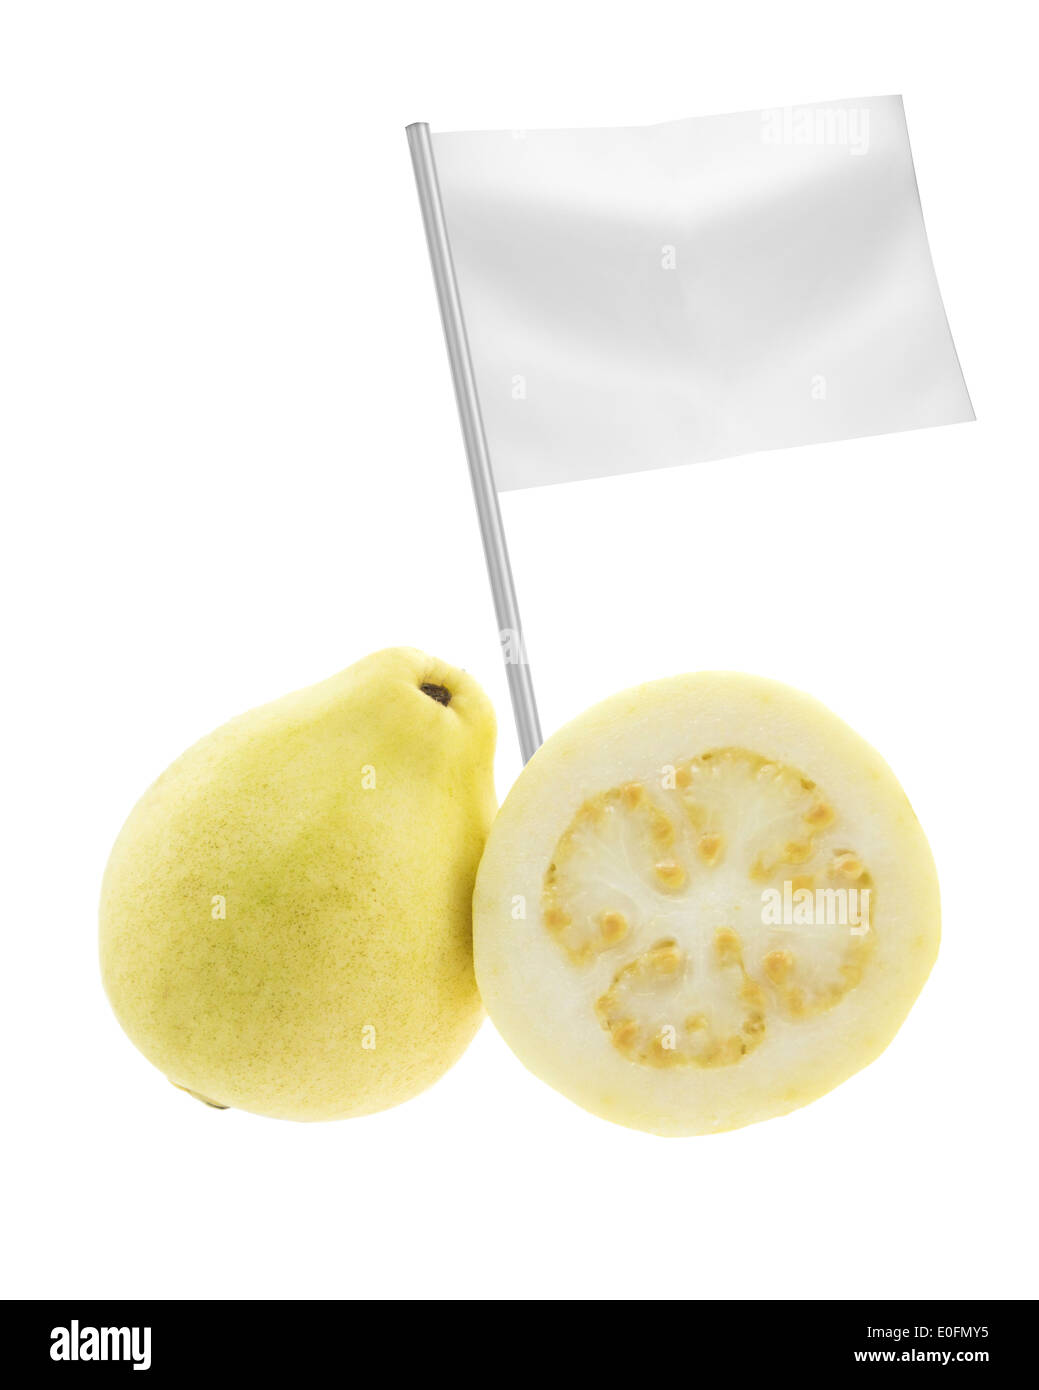 Healthy and organic food concept. Fresh Guava with flag showing the benefits or the price of fruits. Stock Photo